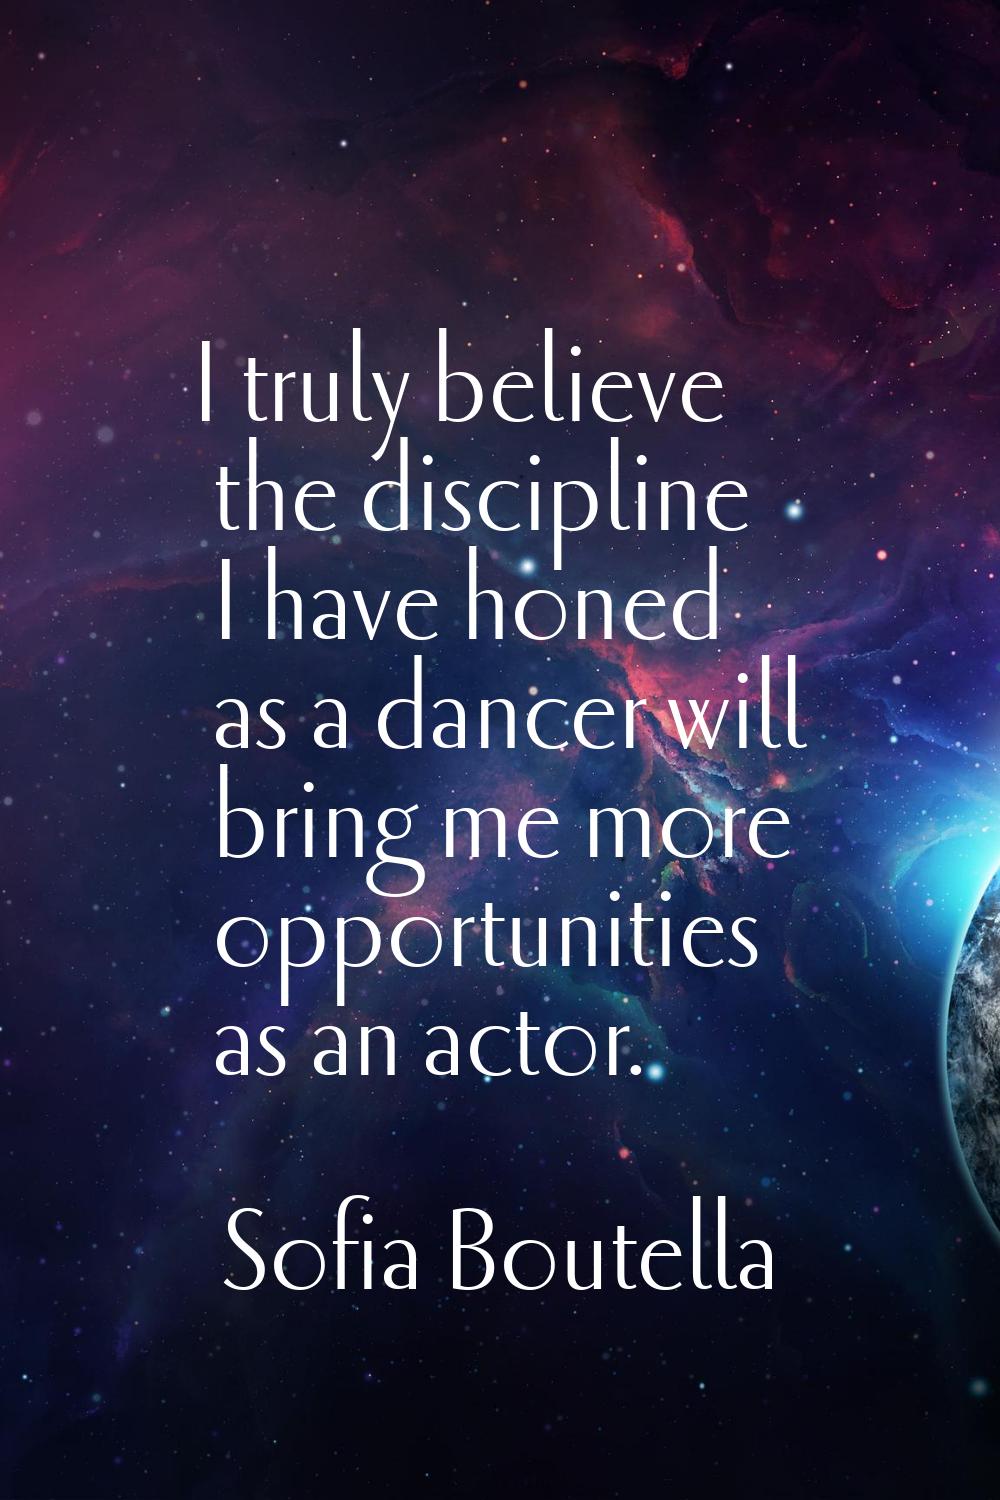 I truly believe the discipline I have honed as a dancer will bring me more opportunities as an acto